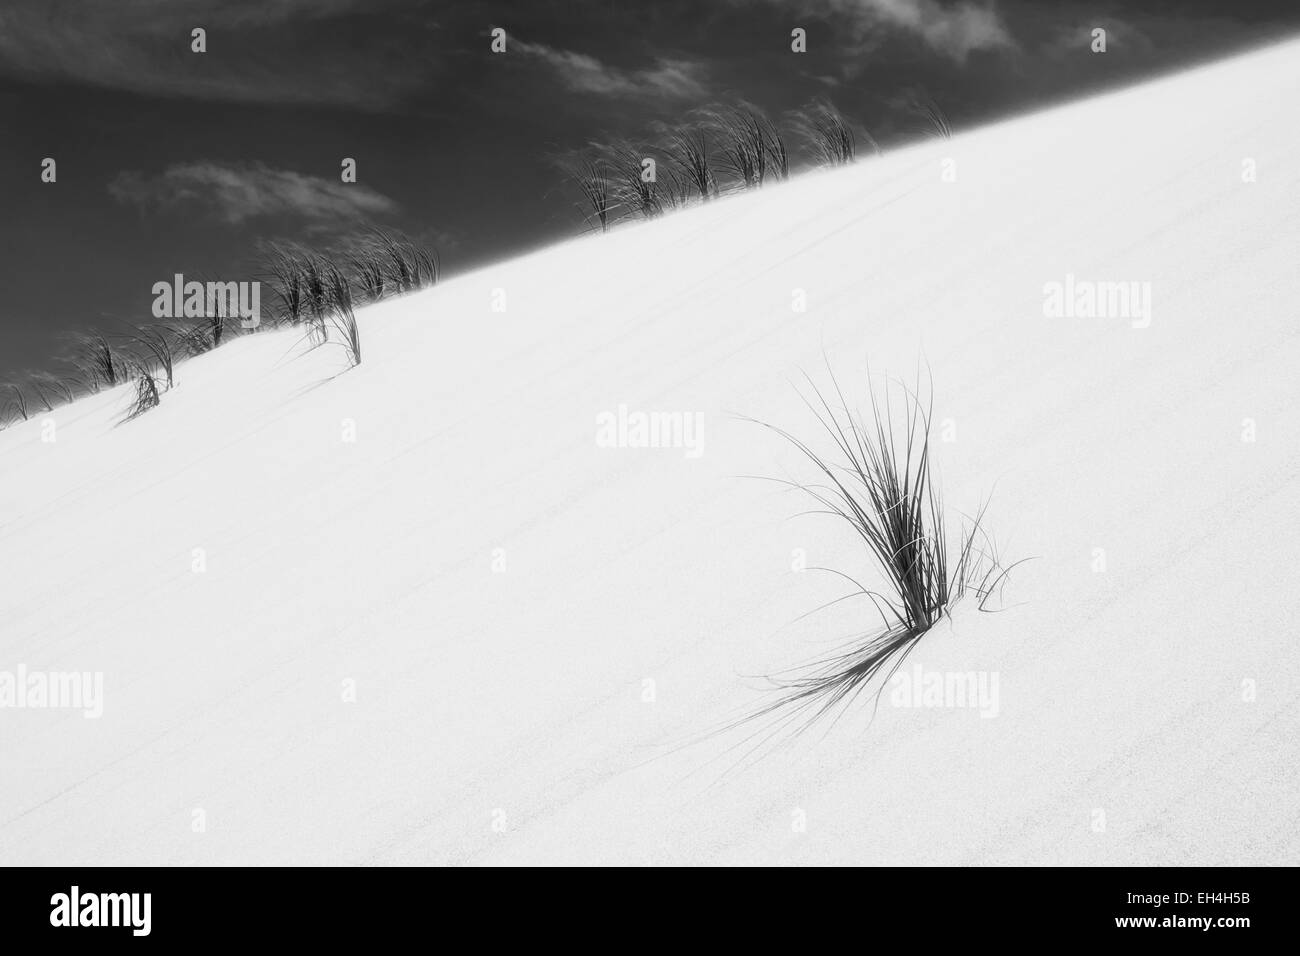 90 mile beach and grass on dunes in Northland, New Zealand. Colour version EH4H50 Stock Photo